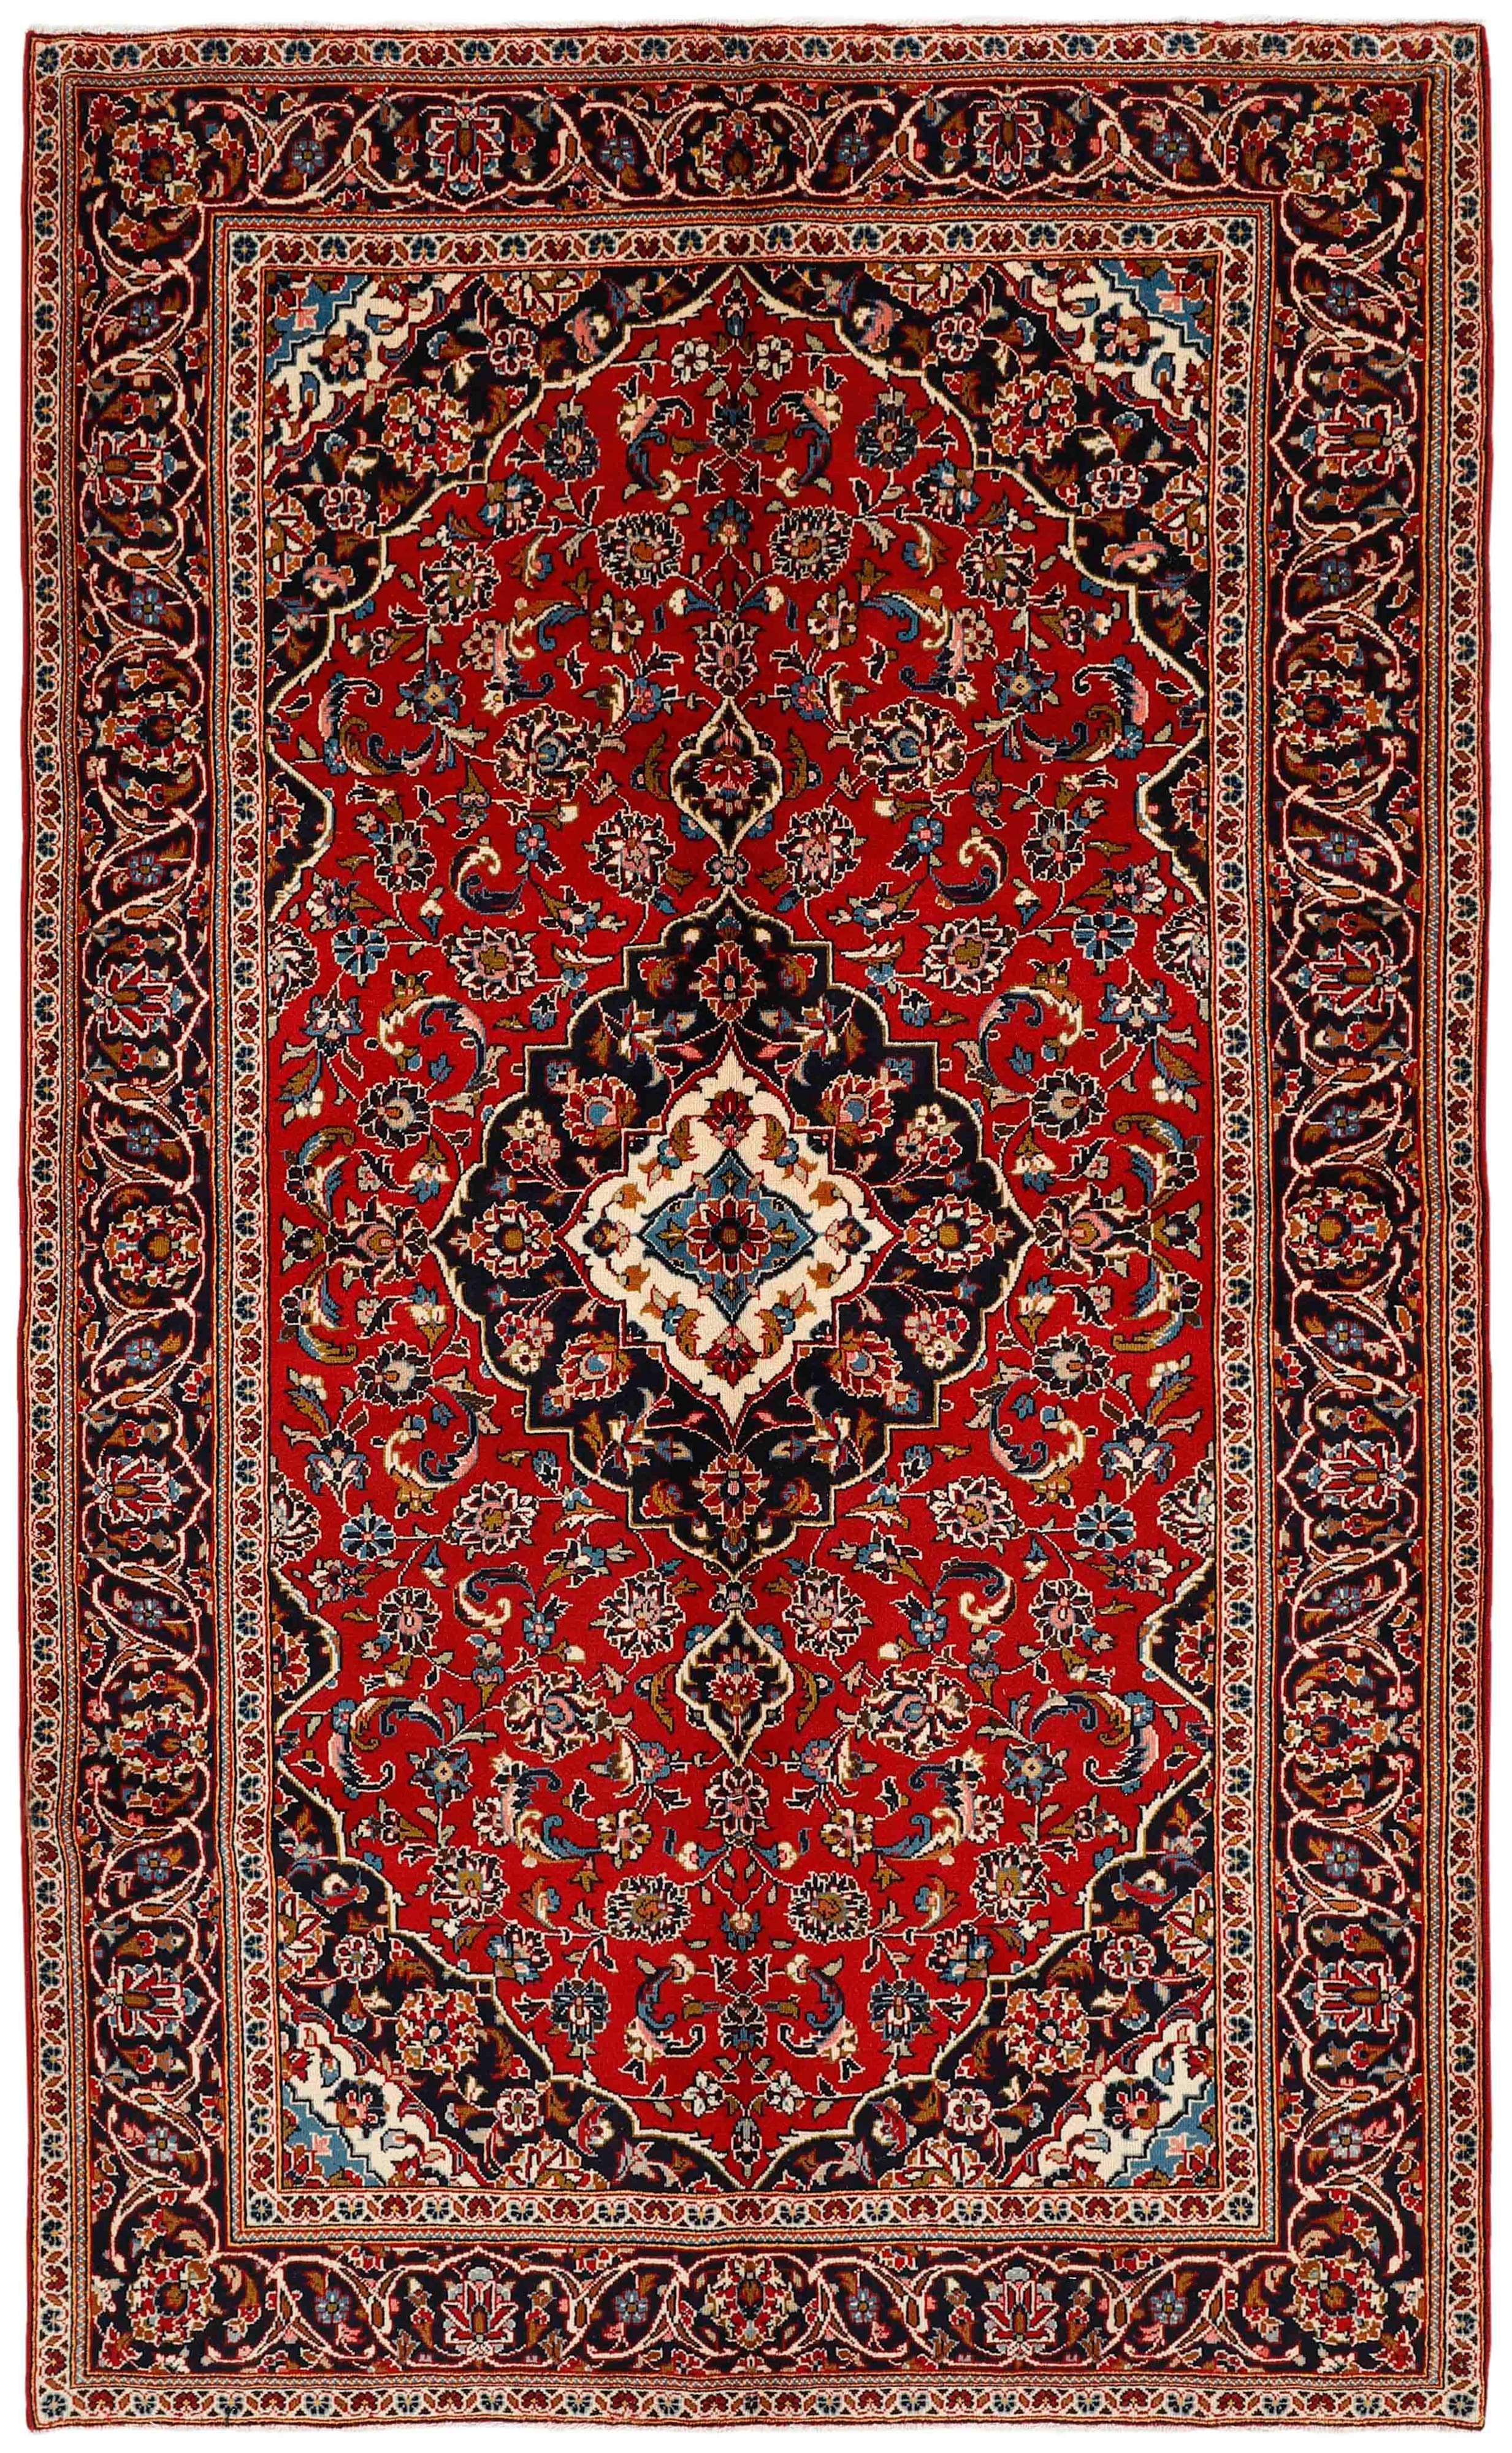 Authentic persian rug with Traditionalfloral design in red and blue